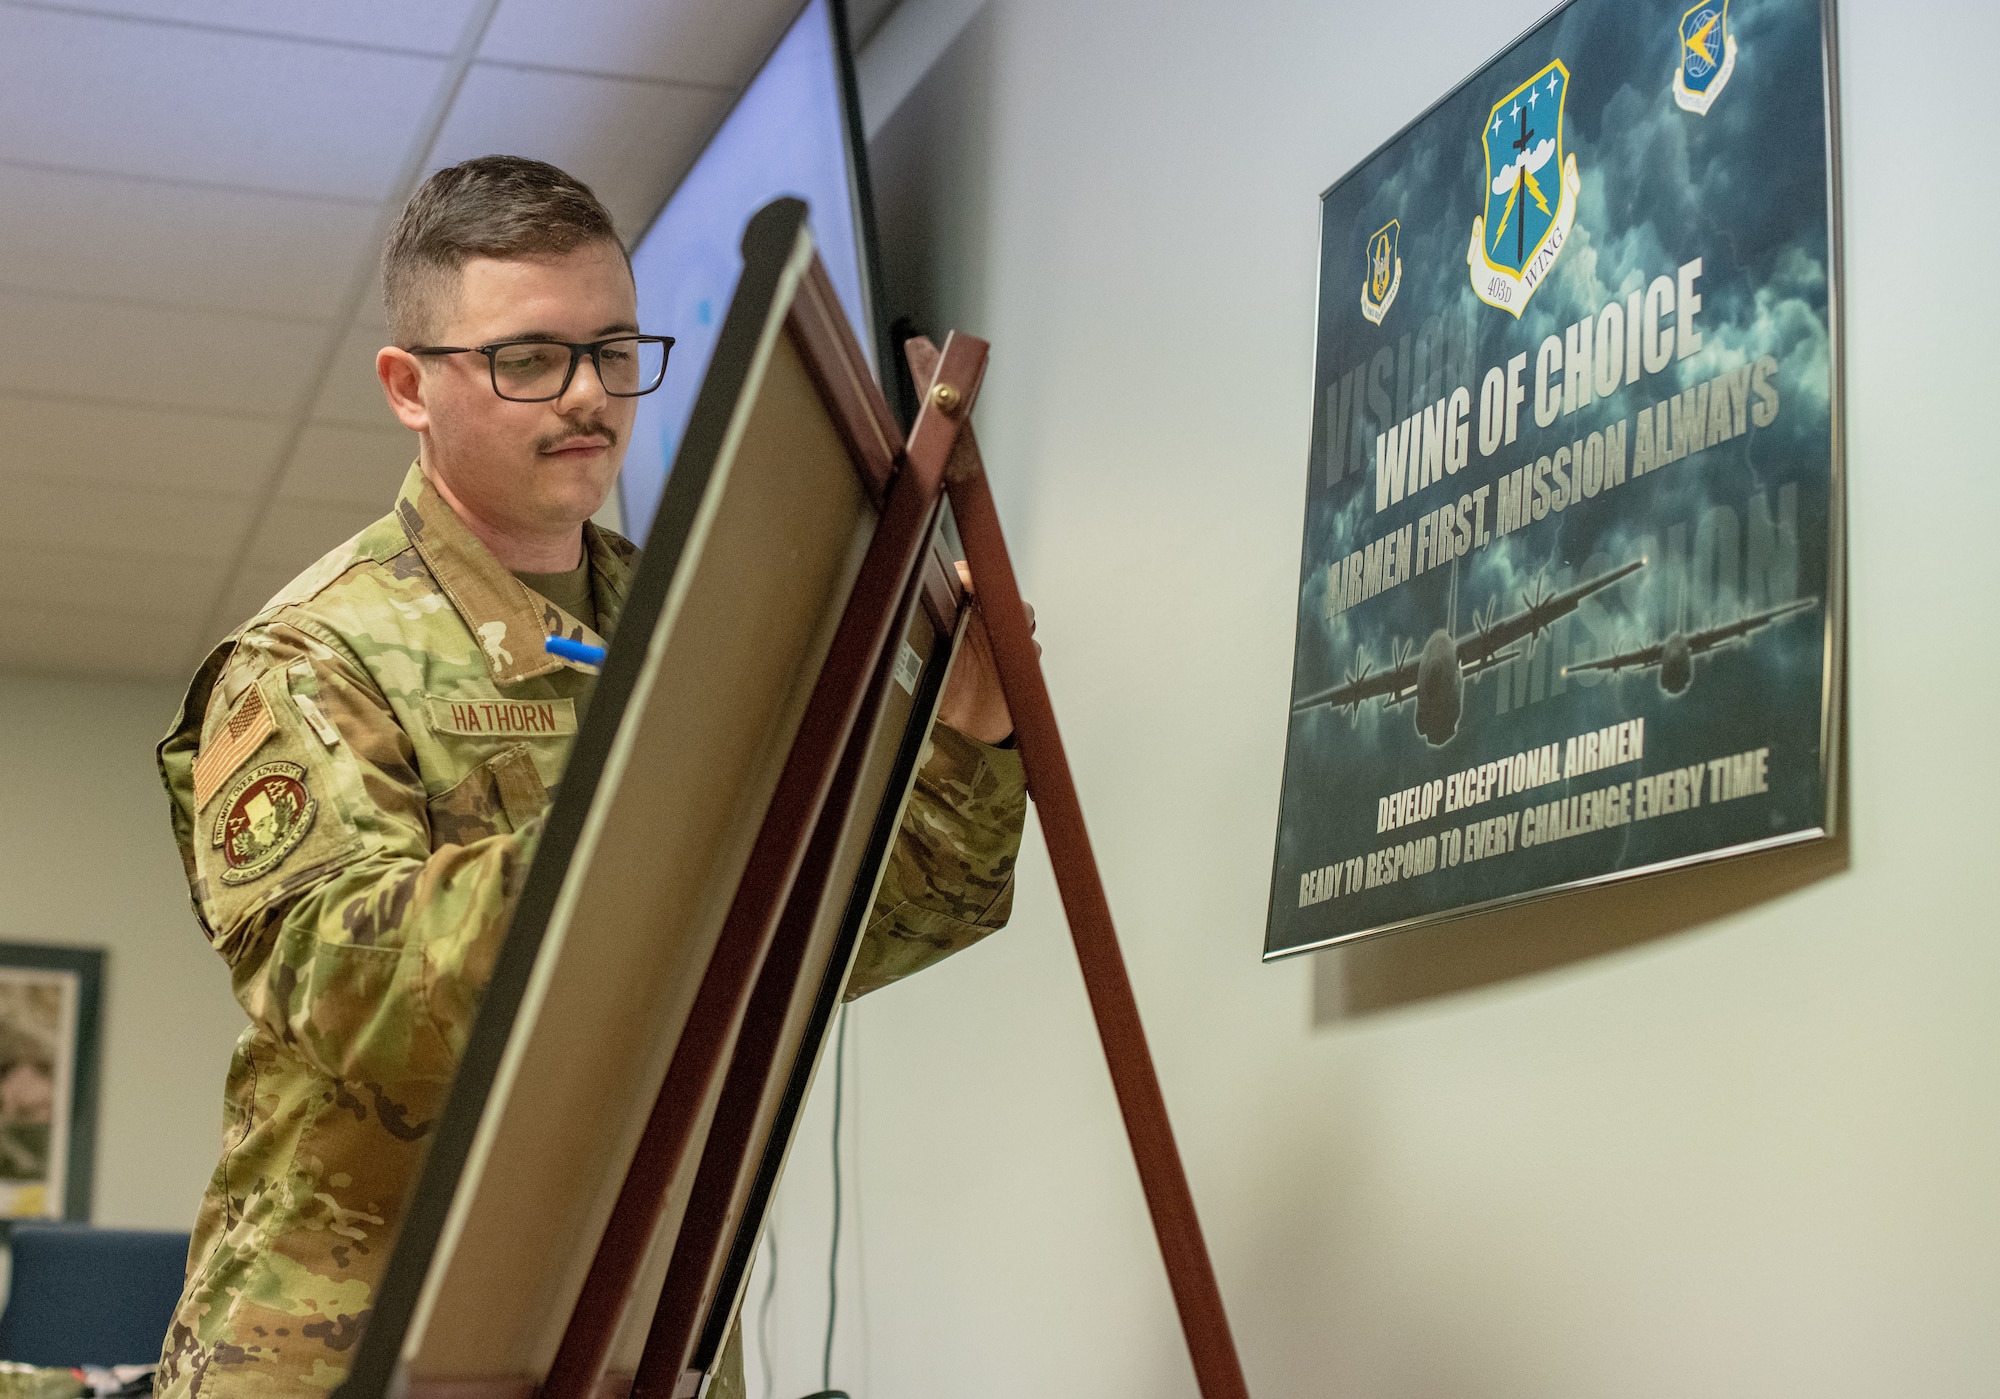 An Airmen writes on a whiteboard that is sitting on a three-legged stand